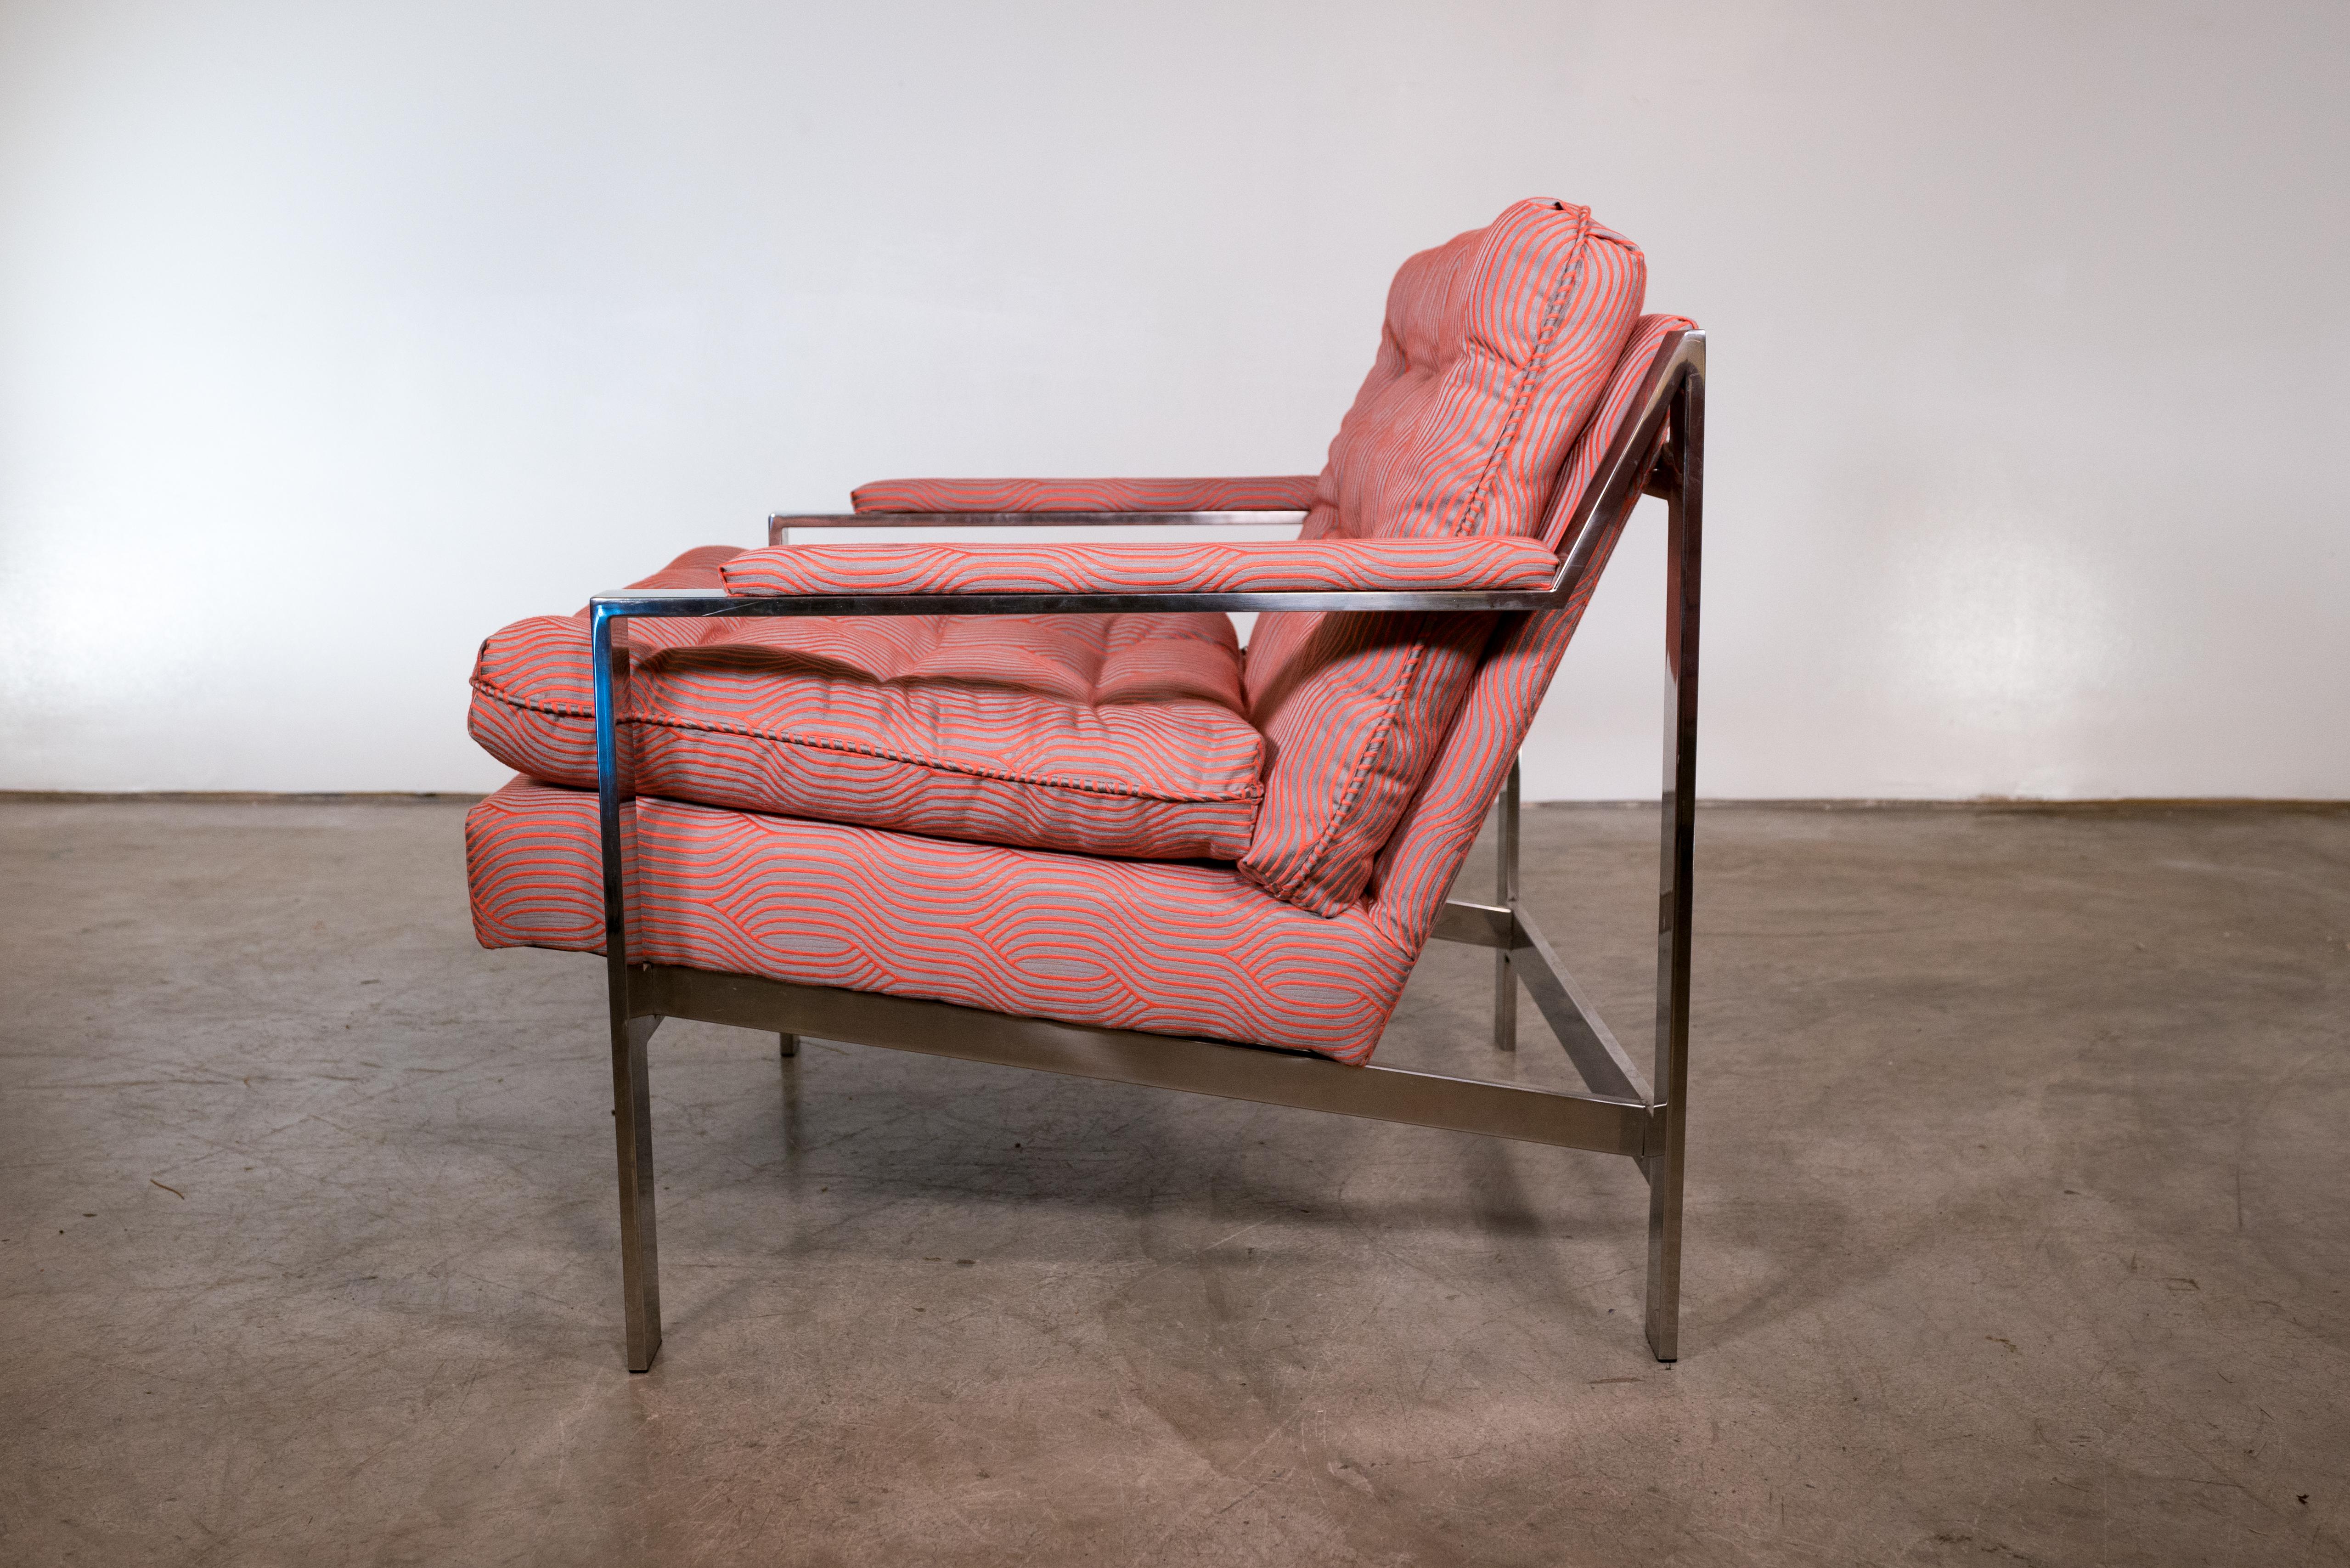 Designer: Cy Mann
Manufacture: Cy Mann Design
Period/style: Mid-Century Modern 
 Country: USA 
Date: 1970s.